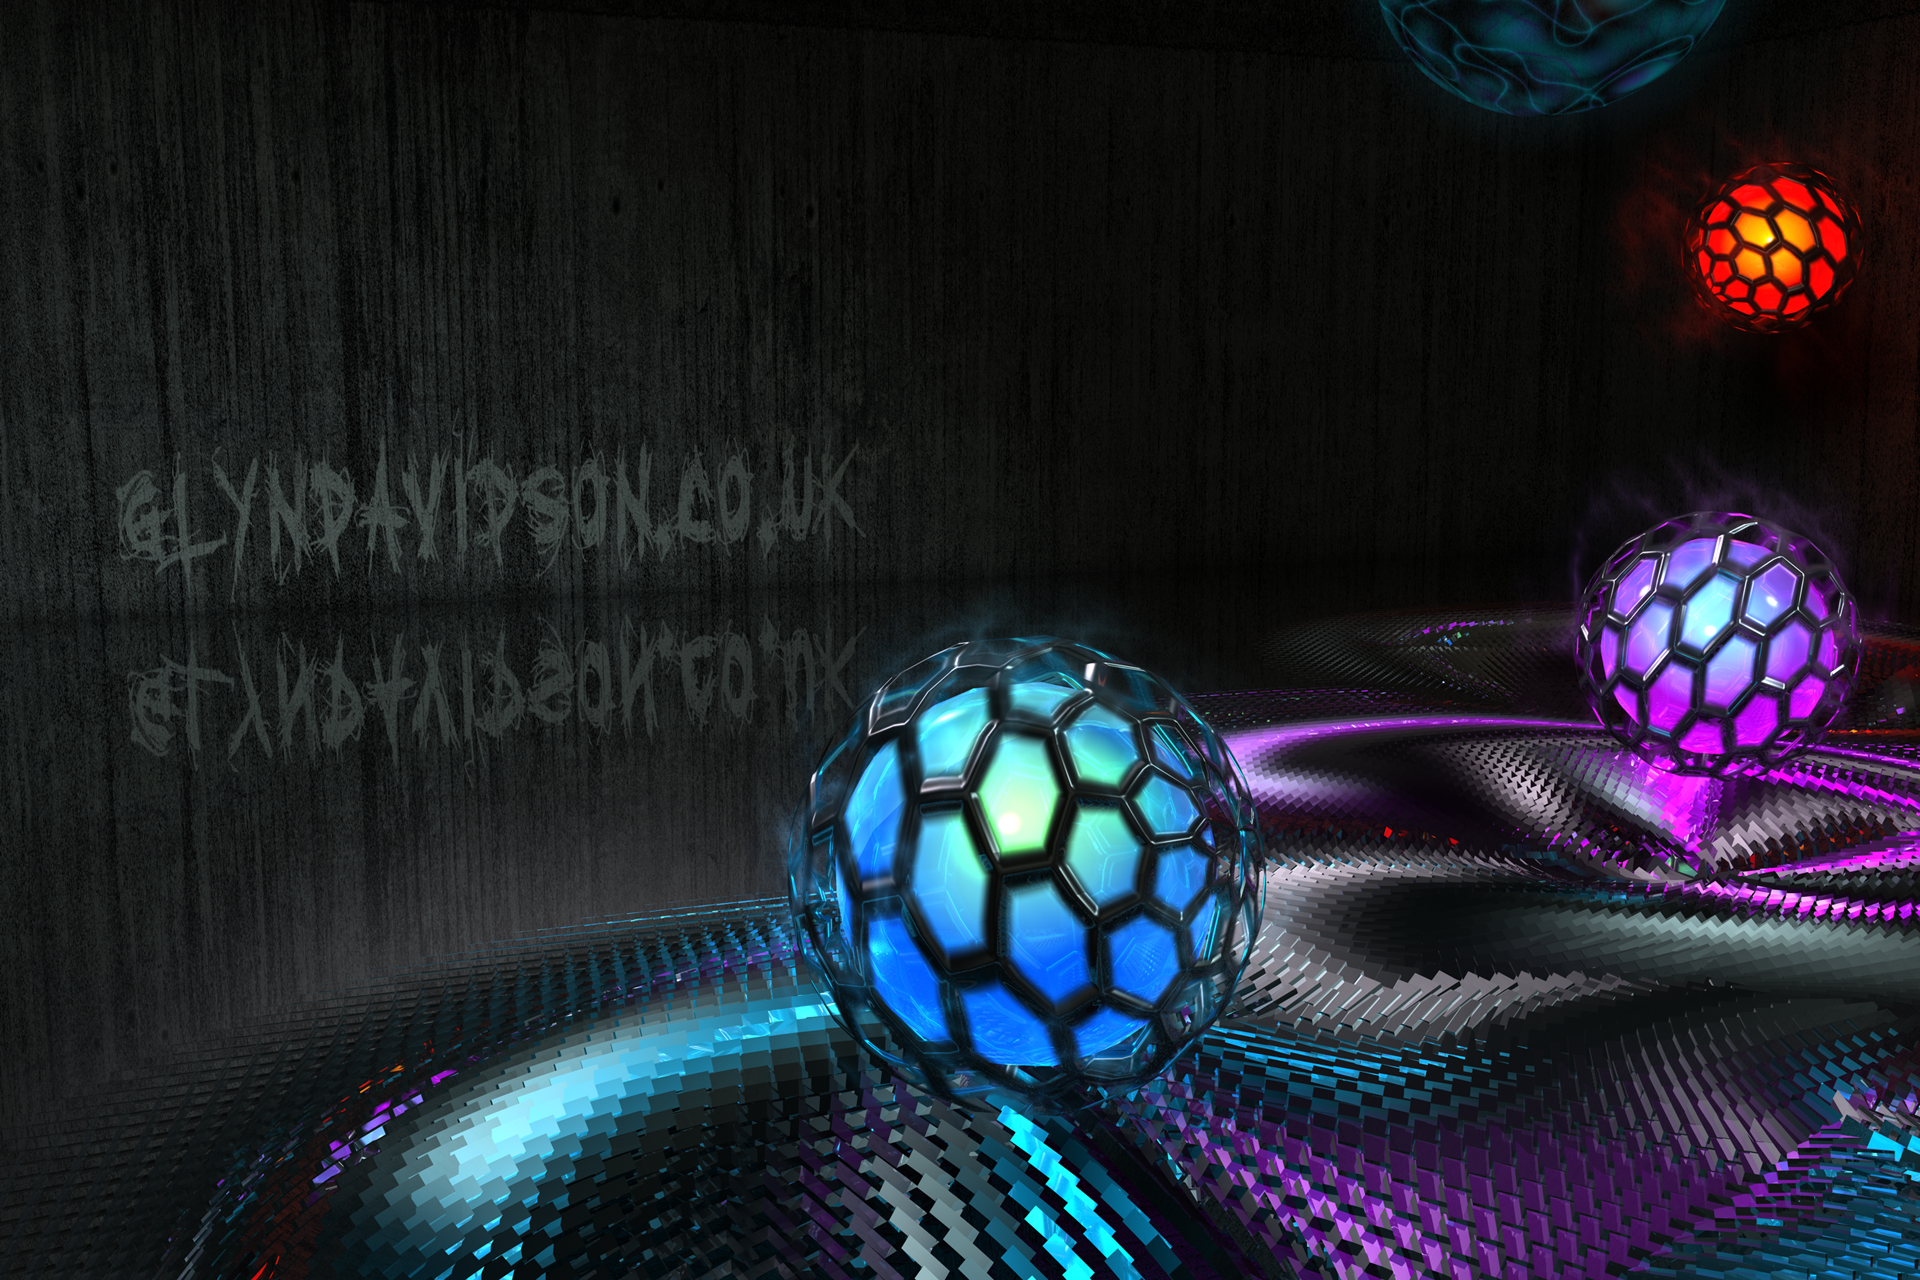 Cinema 4D Mograph wallpaper by TheRealGlyph on